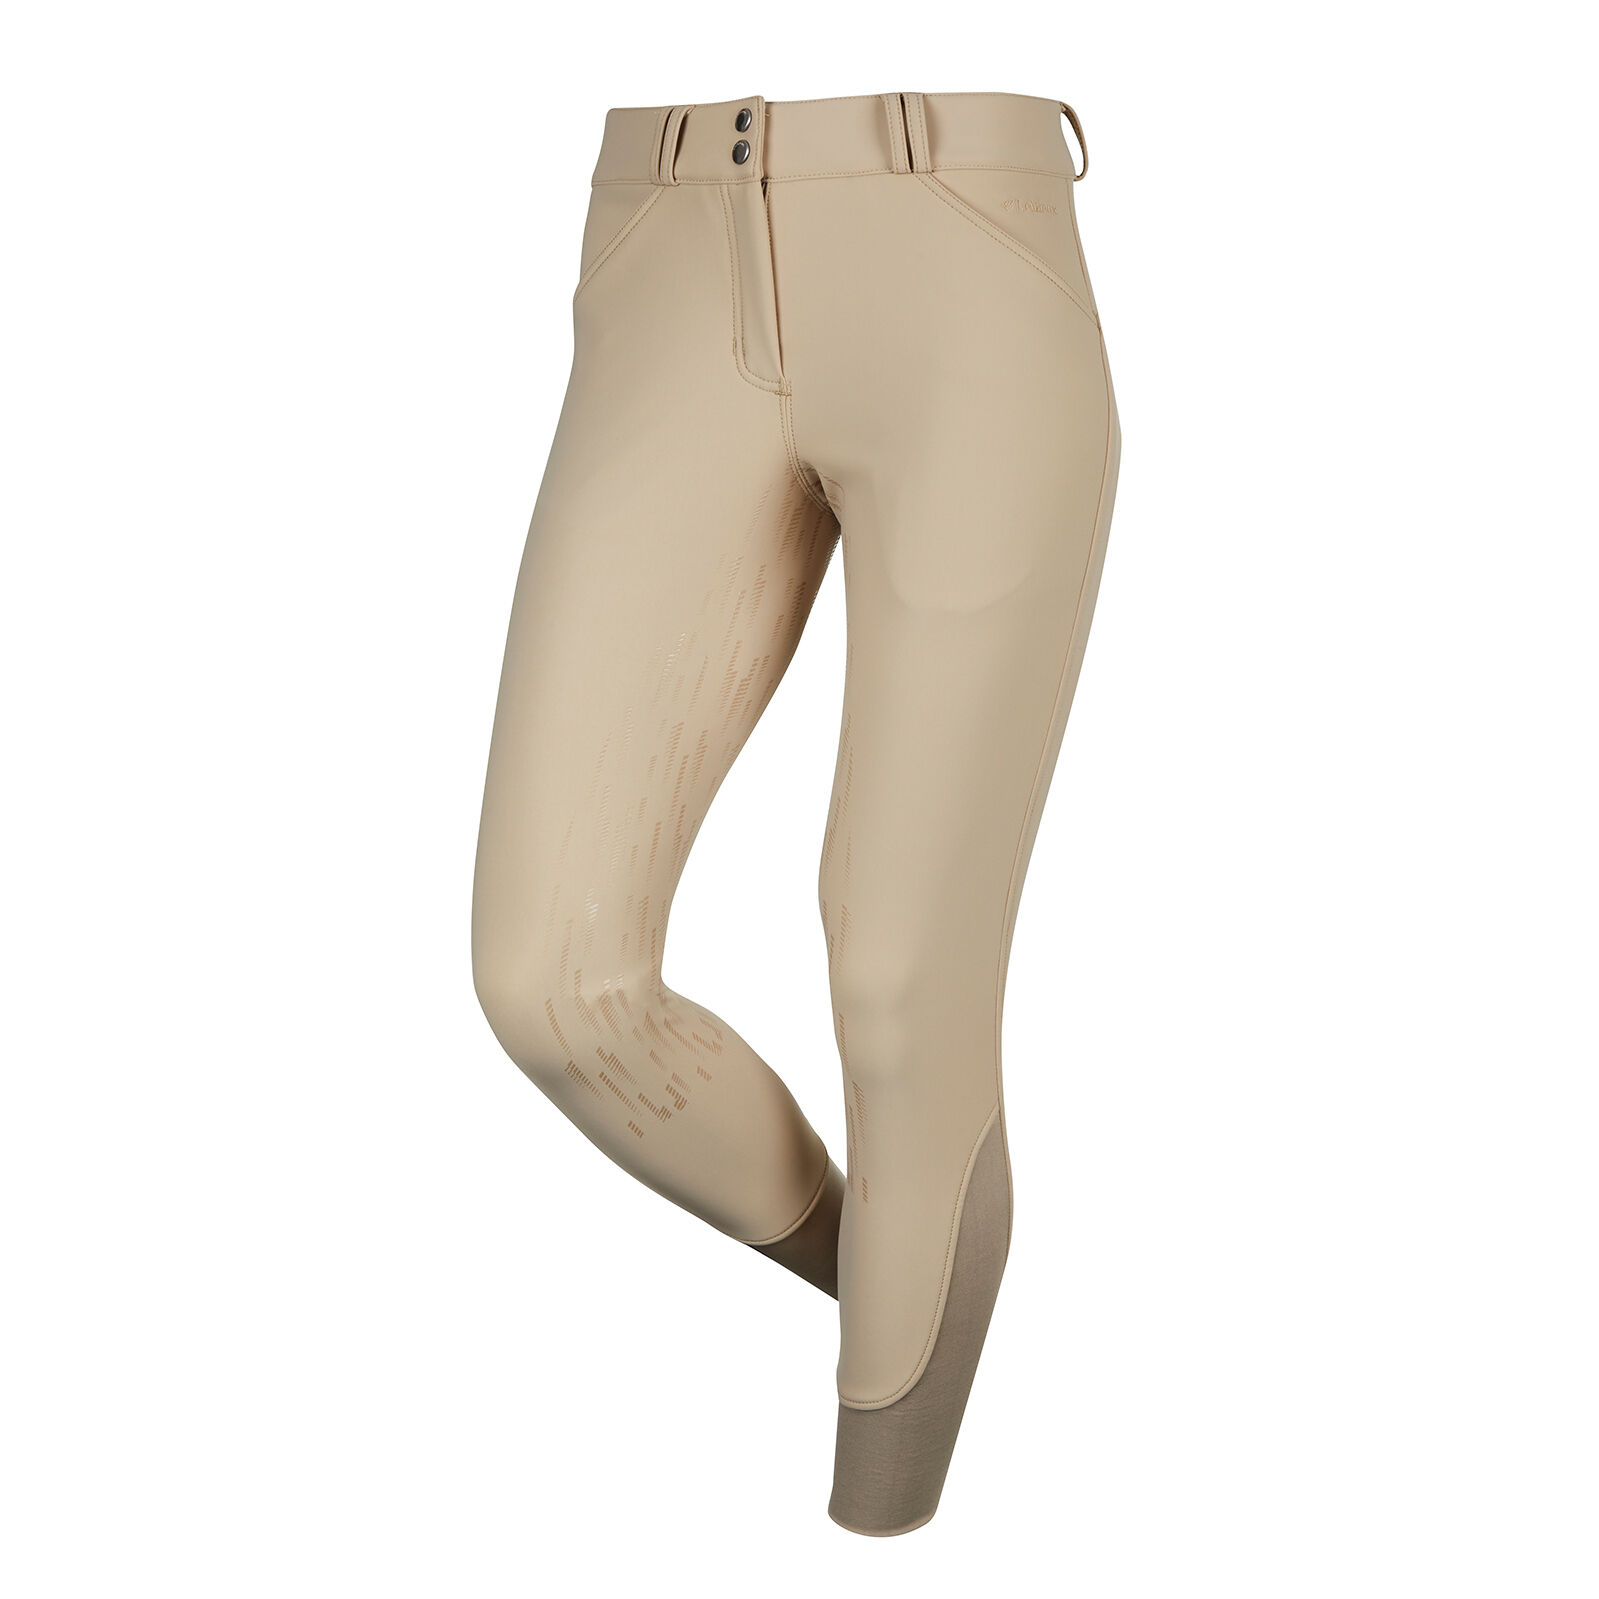 BUY ROYAL ENFIELD CEARA RIDING TROUSER ONLINE